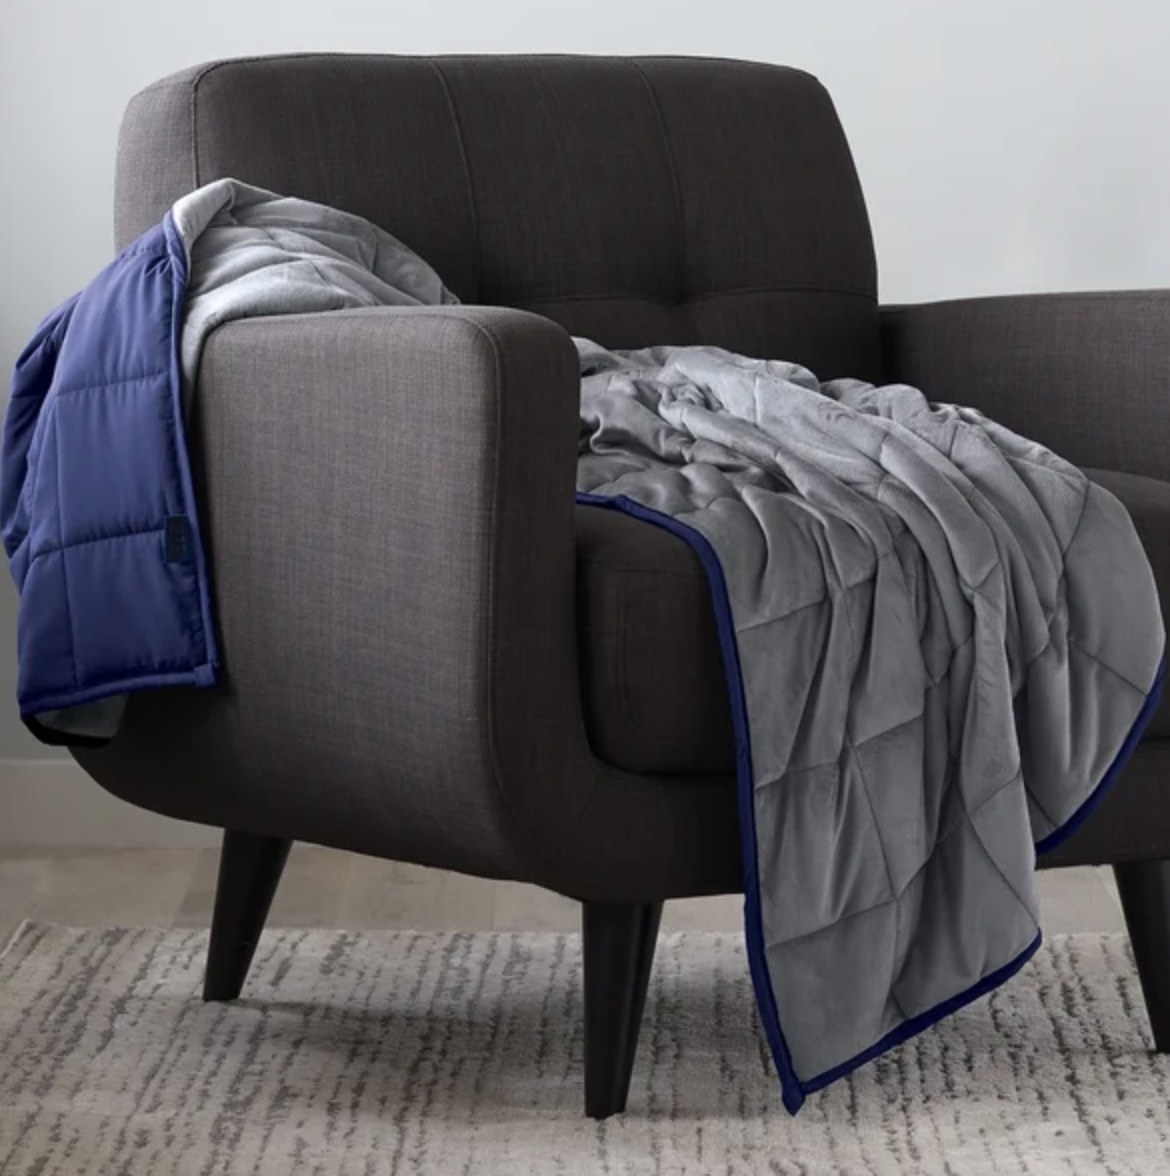 The reversible blanket has a gray side and a dark blue side and is draped across a dark chair